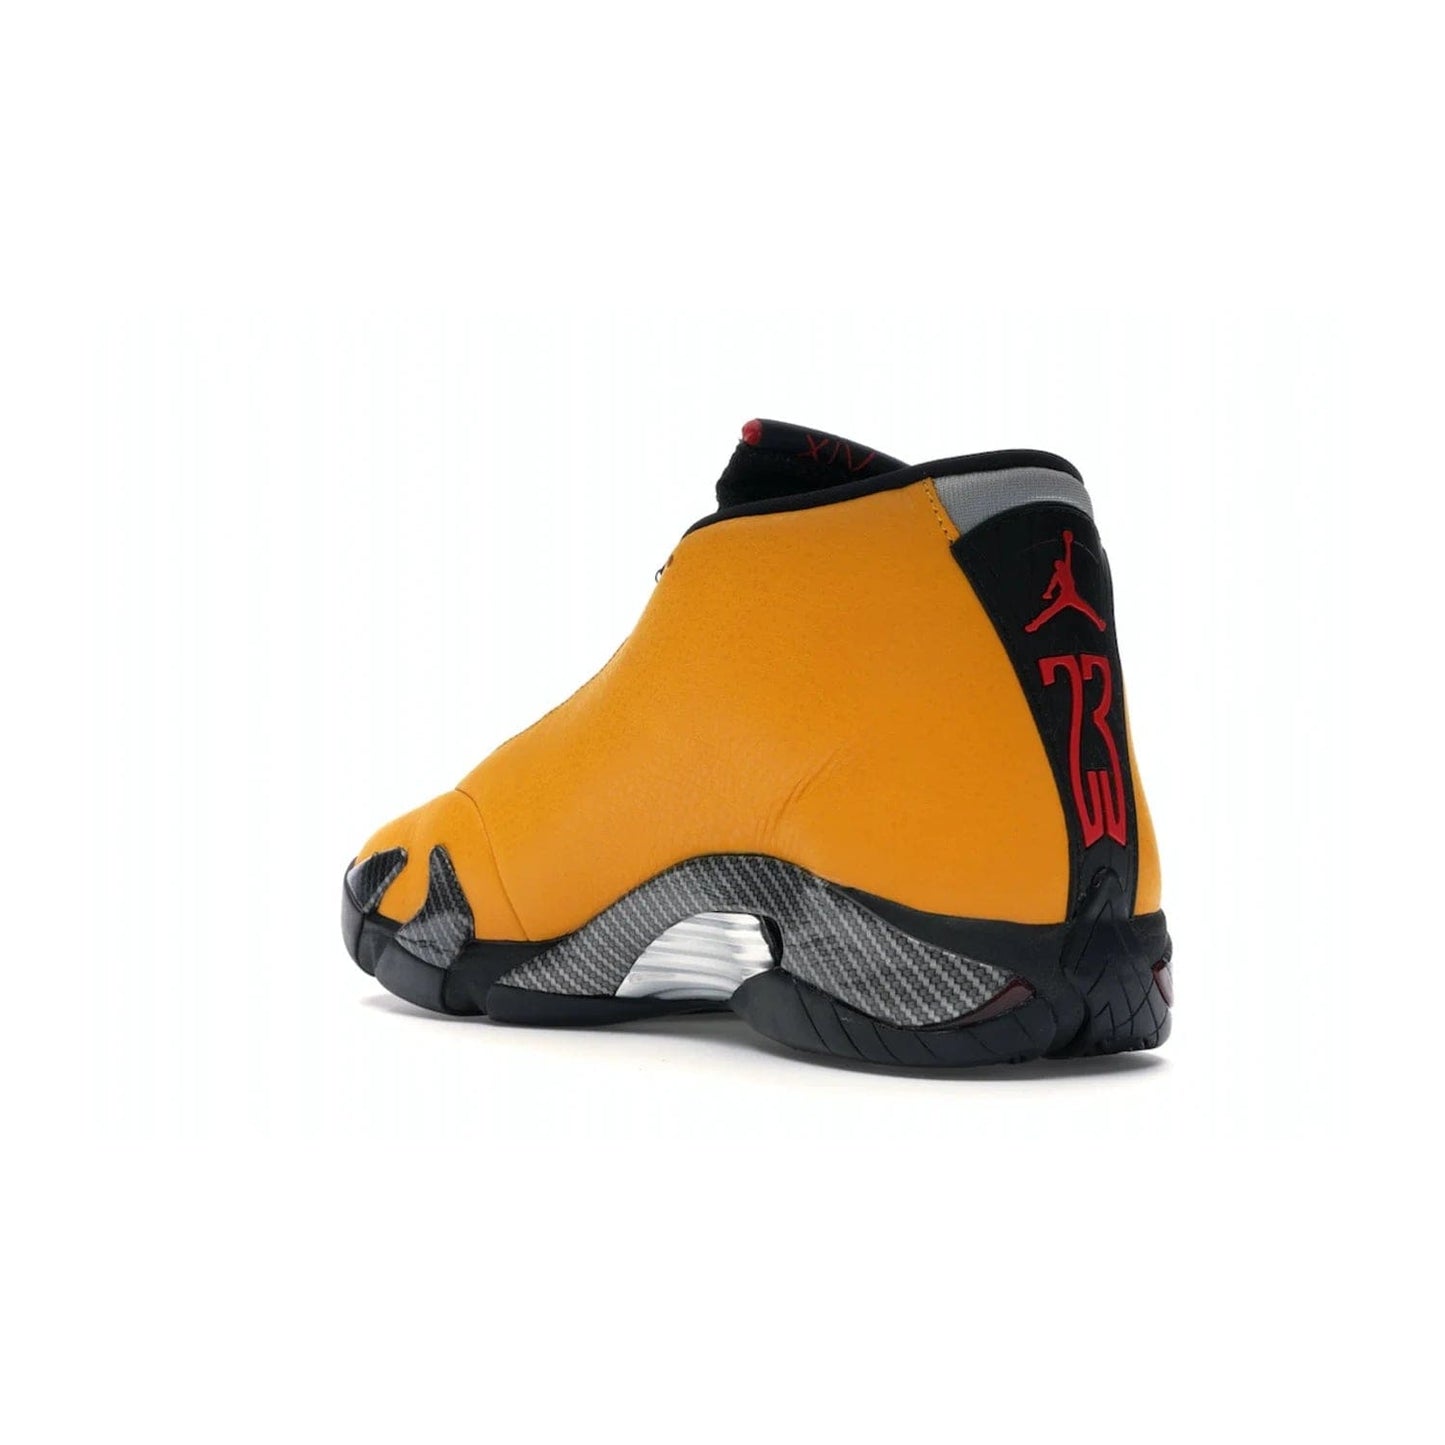 Jordan 14 Retro University Gold - Image 24 - Only at www.BallersClubKickz.com - Air Jordan 14 Retro University Gold: High-quality leather sneaker with Jumpman, tongue & heel logos. Zoom Air units & herringbone traction for superior comfort. University Gold outsole for stylish streetwear.